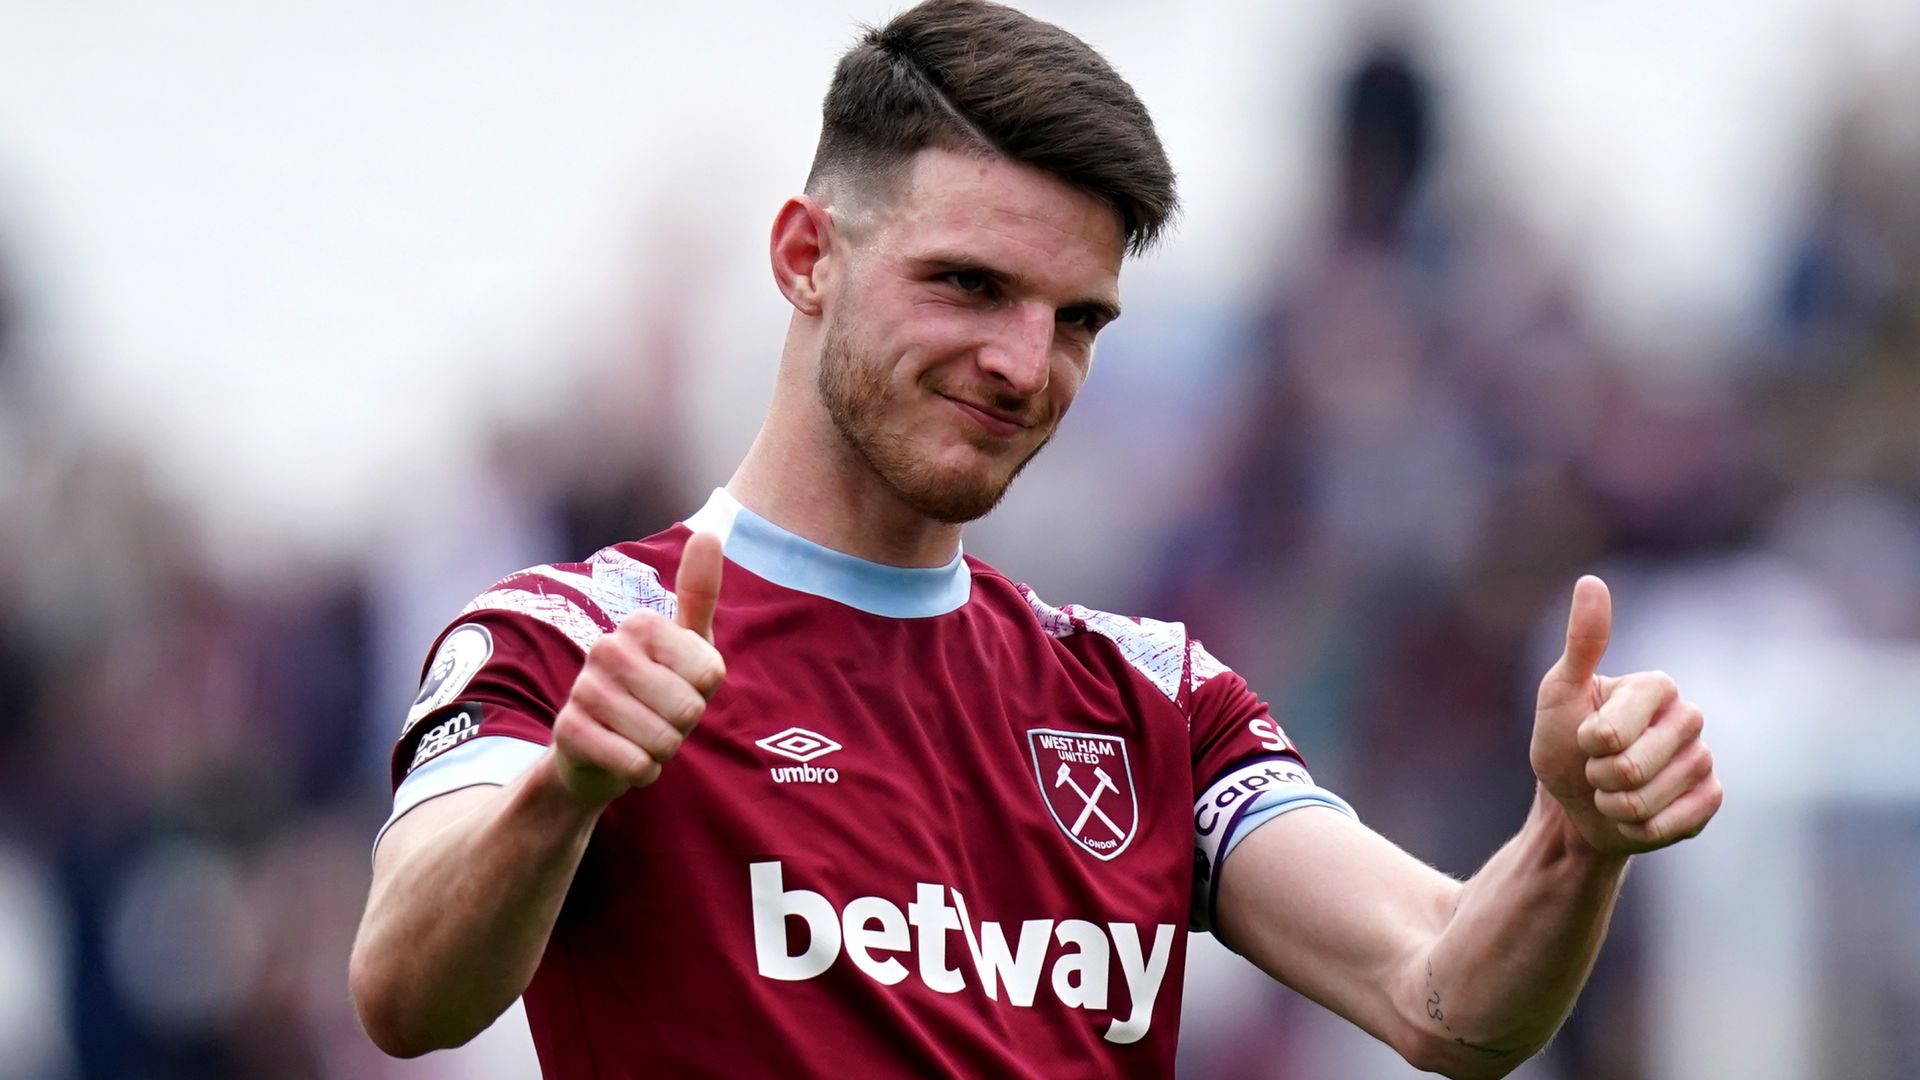 West Ham reject Arsenal's club-record £90m bid for Rice